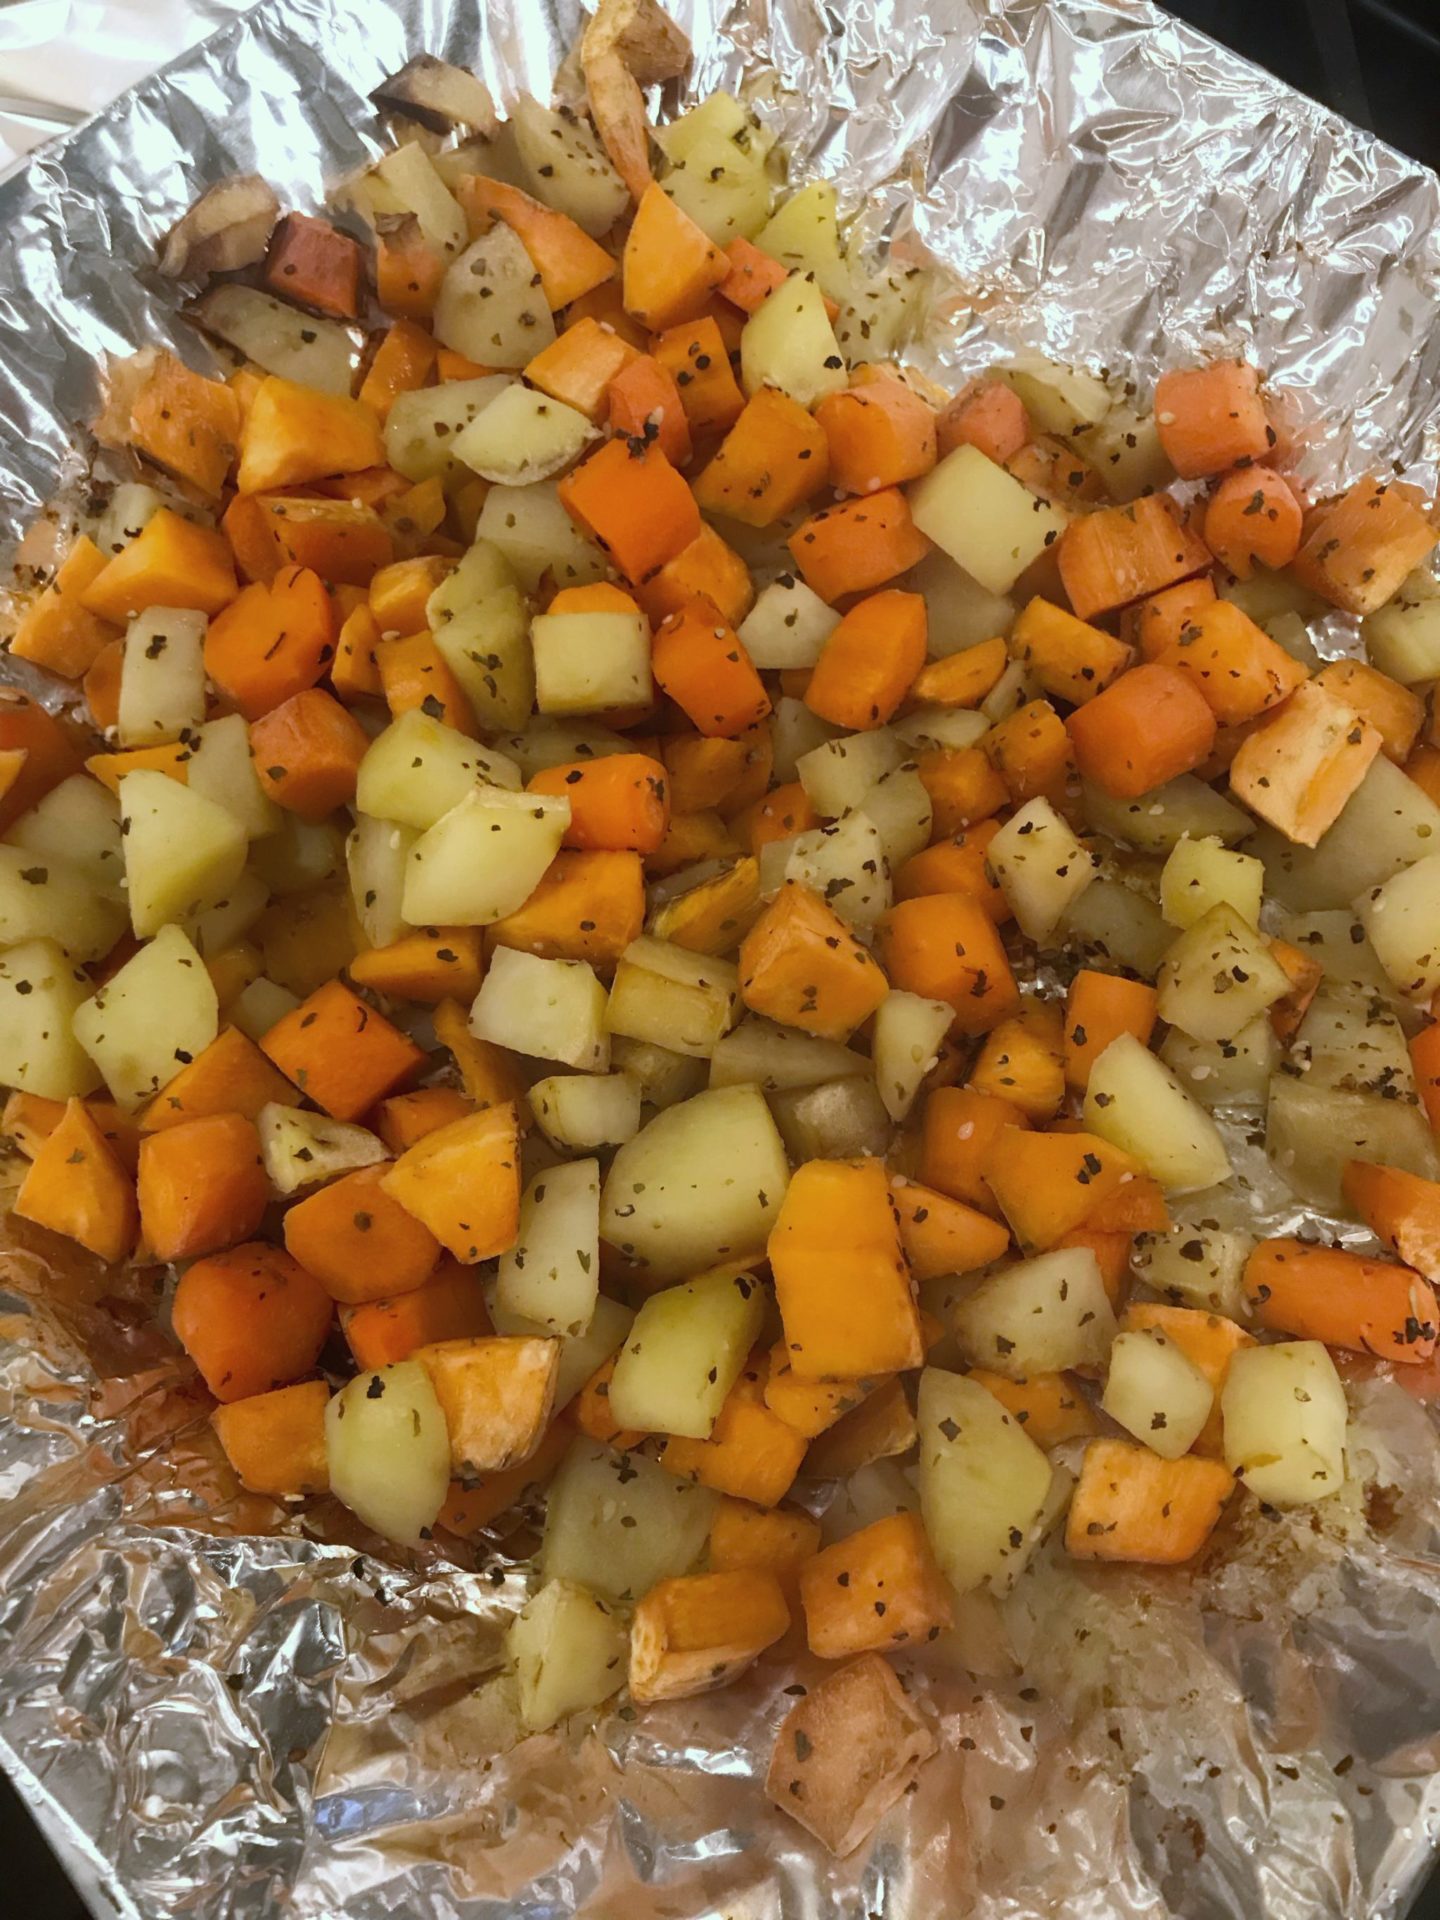 roasted veggies, vegetables, root veggies, potatoes, carrots, yams, sweet potatoes.  good to eat, gluten free, on the grill